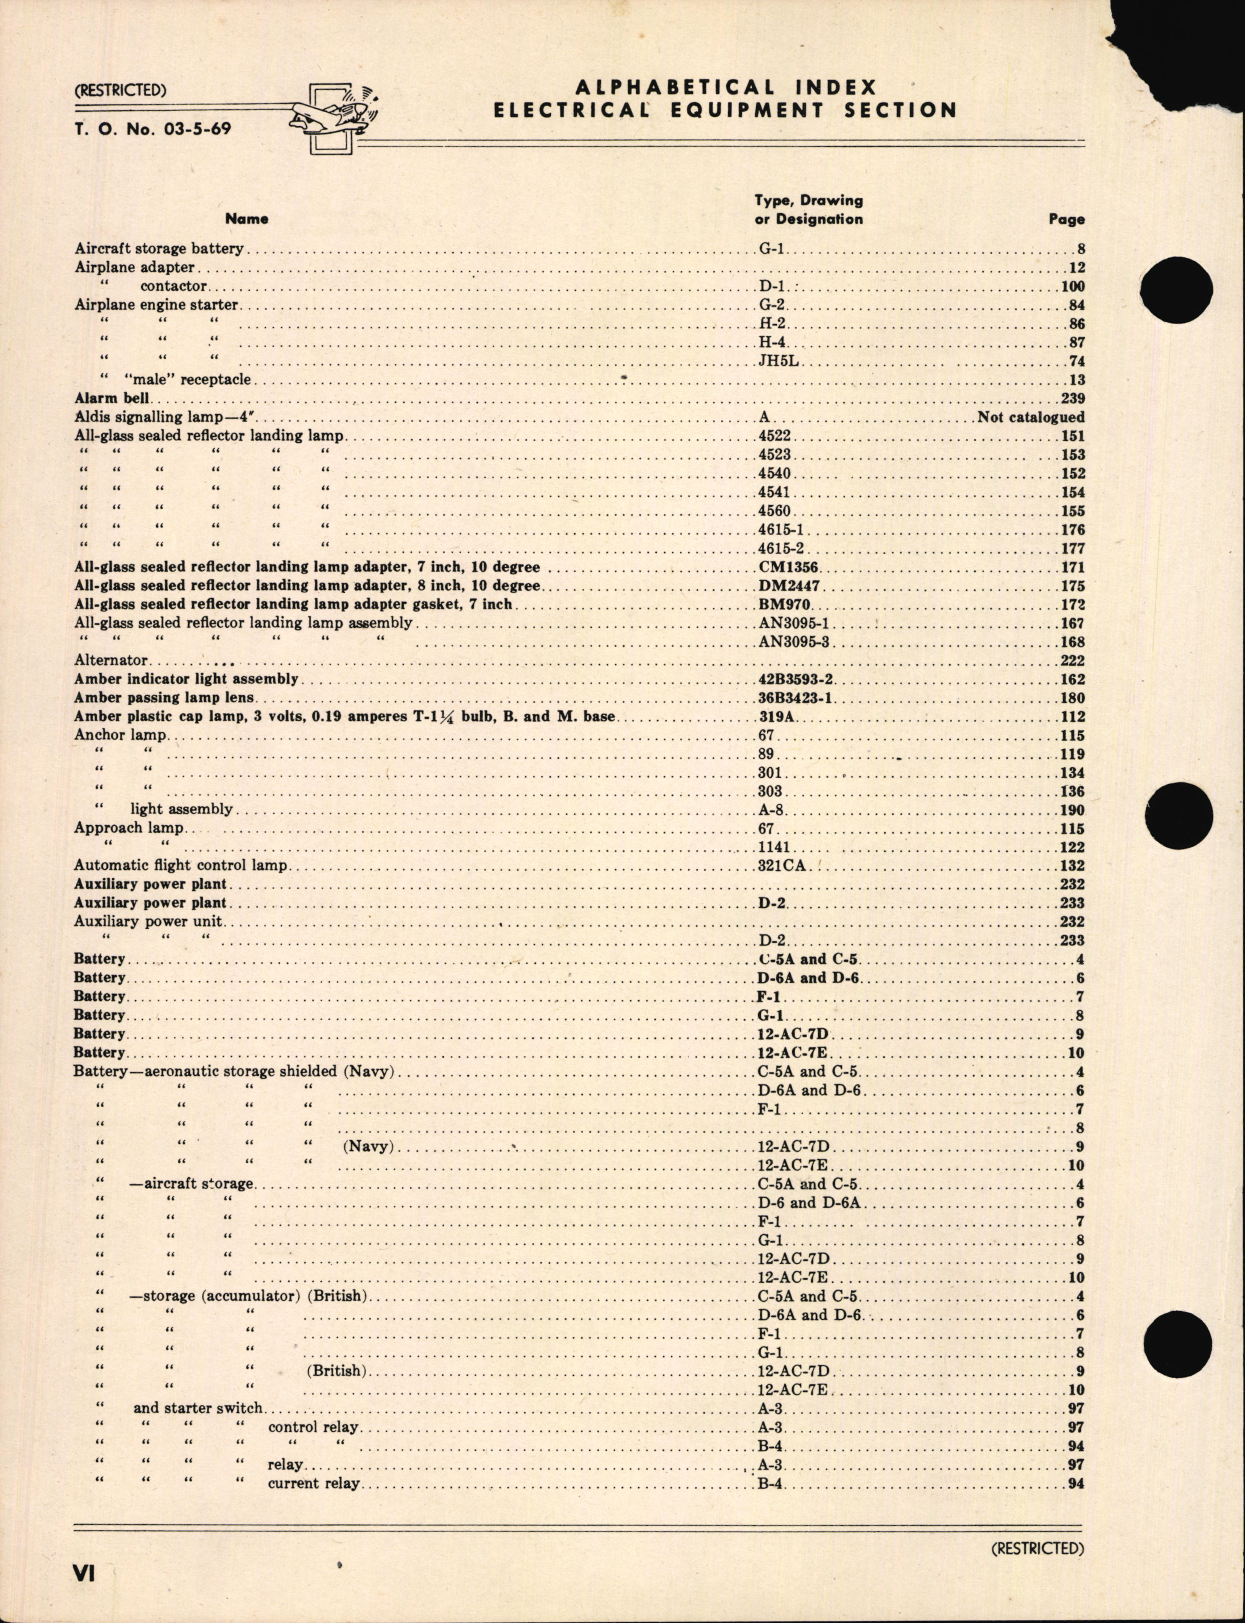 Sample page 6 from AirCorps Library document: Index of Army-Navy Aeronautical Equipment - Electrical